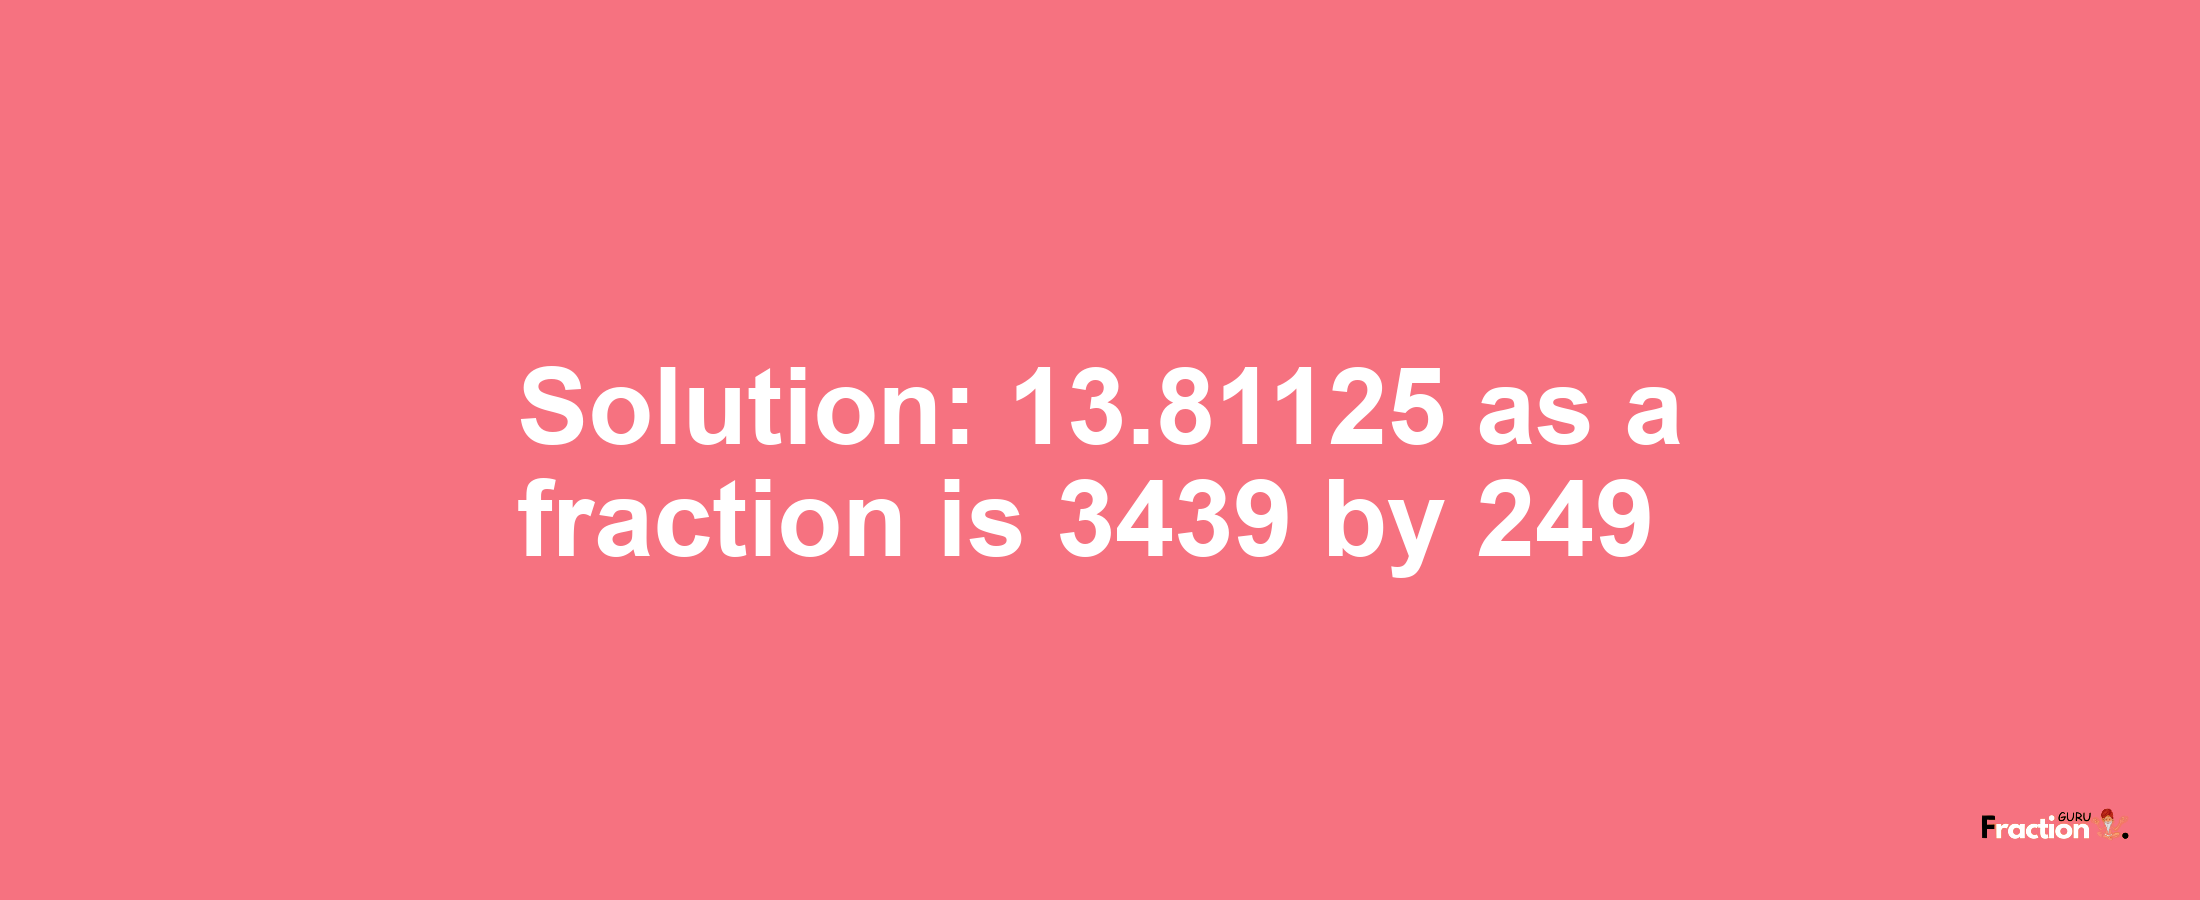 Solution:13.81125 as a fraction is 3439/249